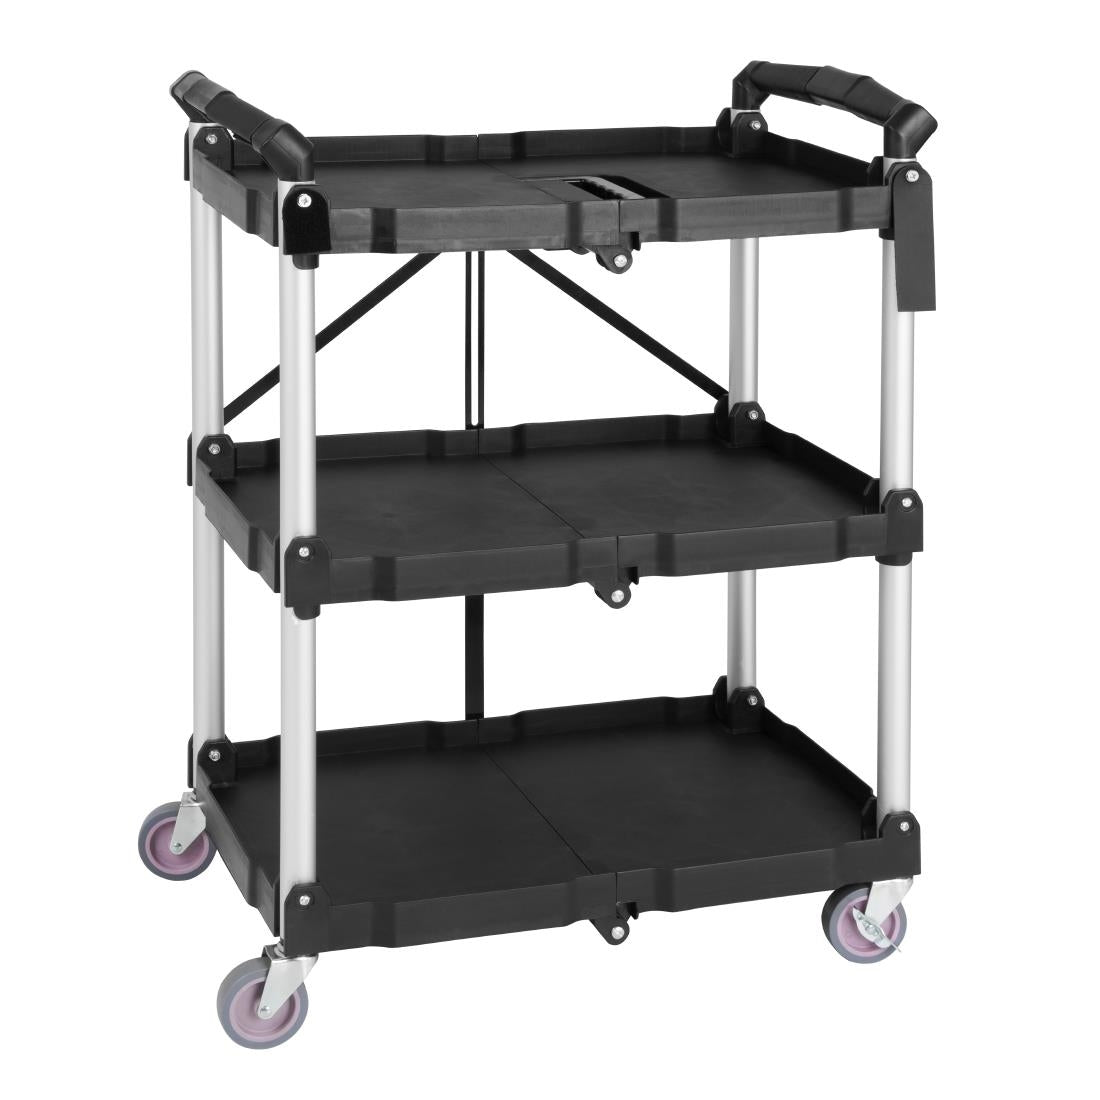 CK113 Vogue 3 Tier PP Folding Trolley Black Small JD Catering Equipment Solutions Ltd